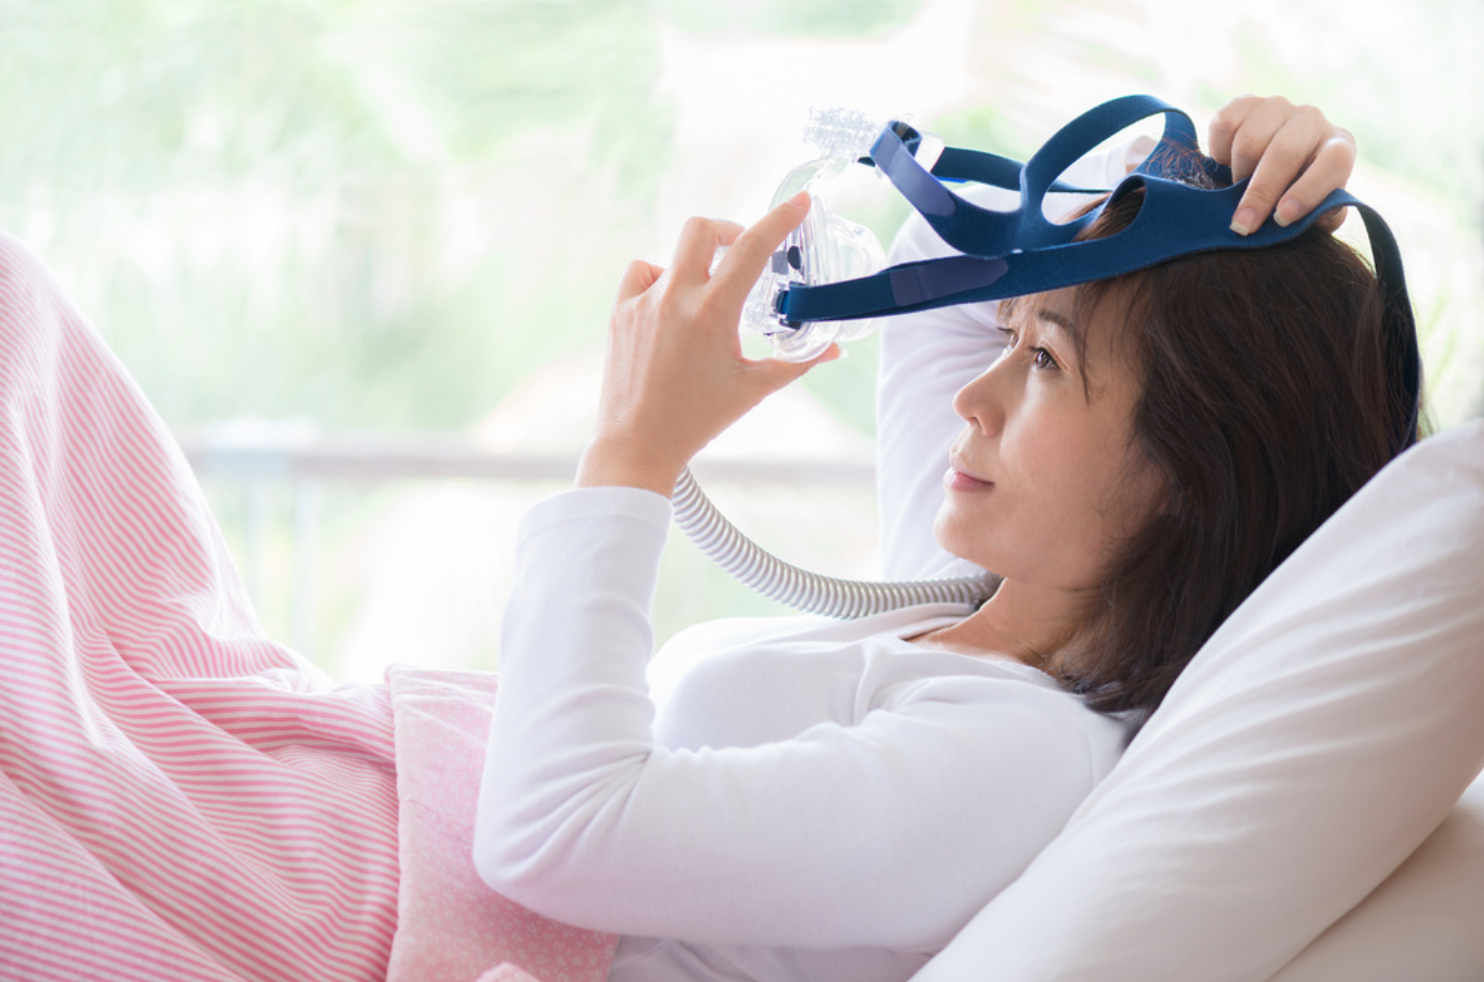 Sleep Apnea During Pregnancy Associated with Risk of Hypertension, Metabolic Syndrome